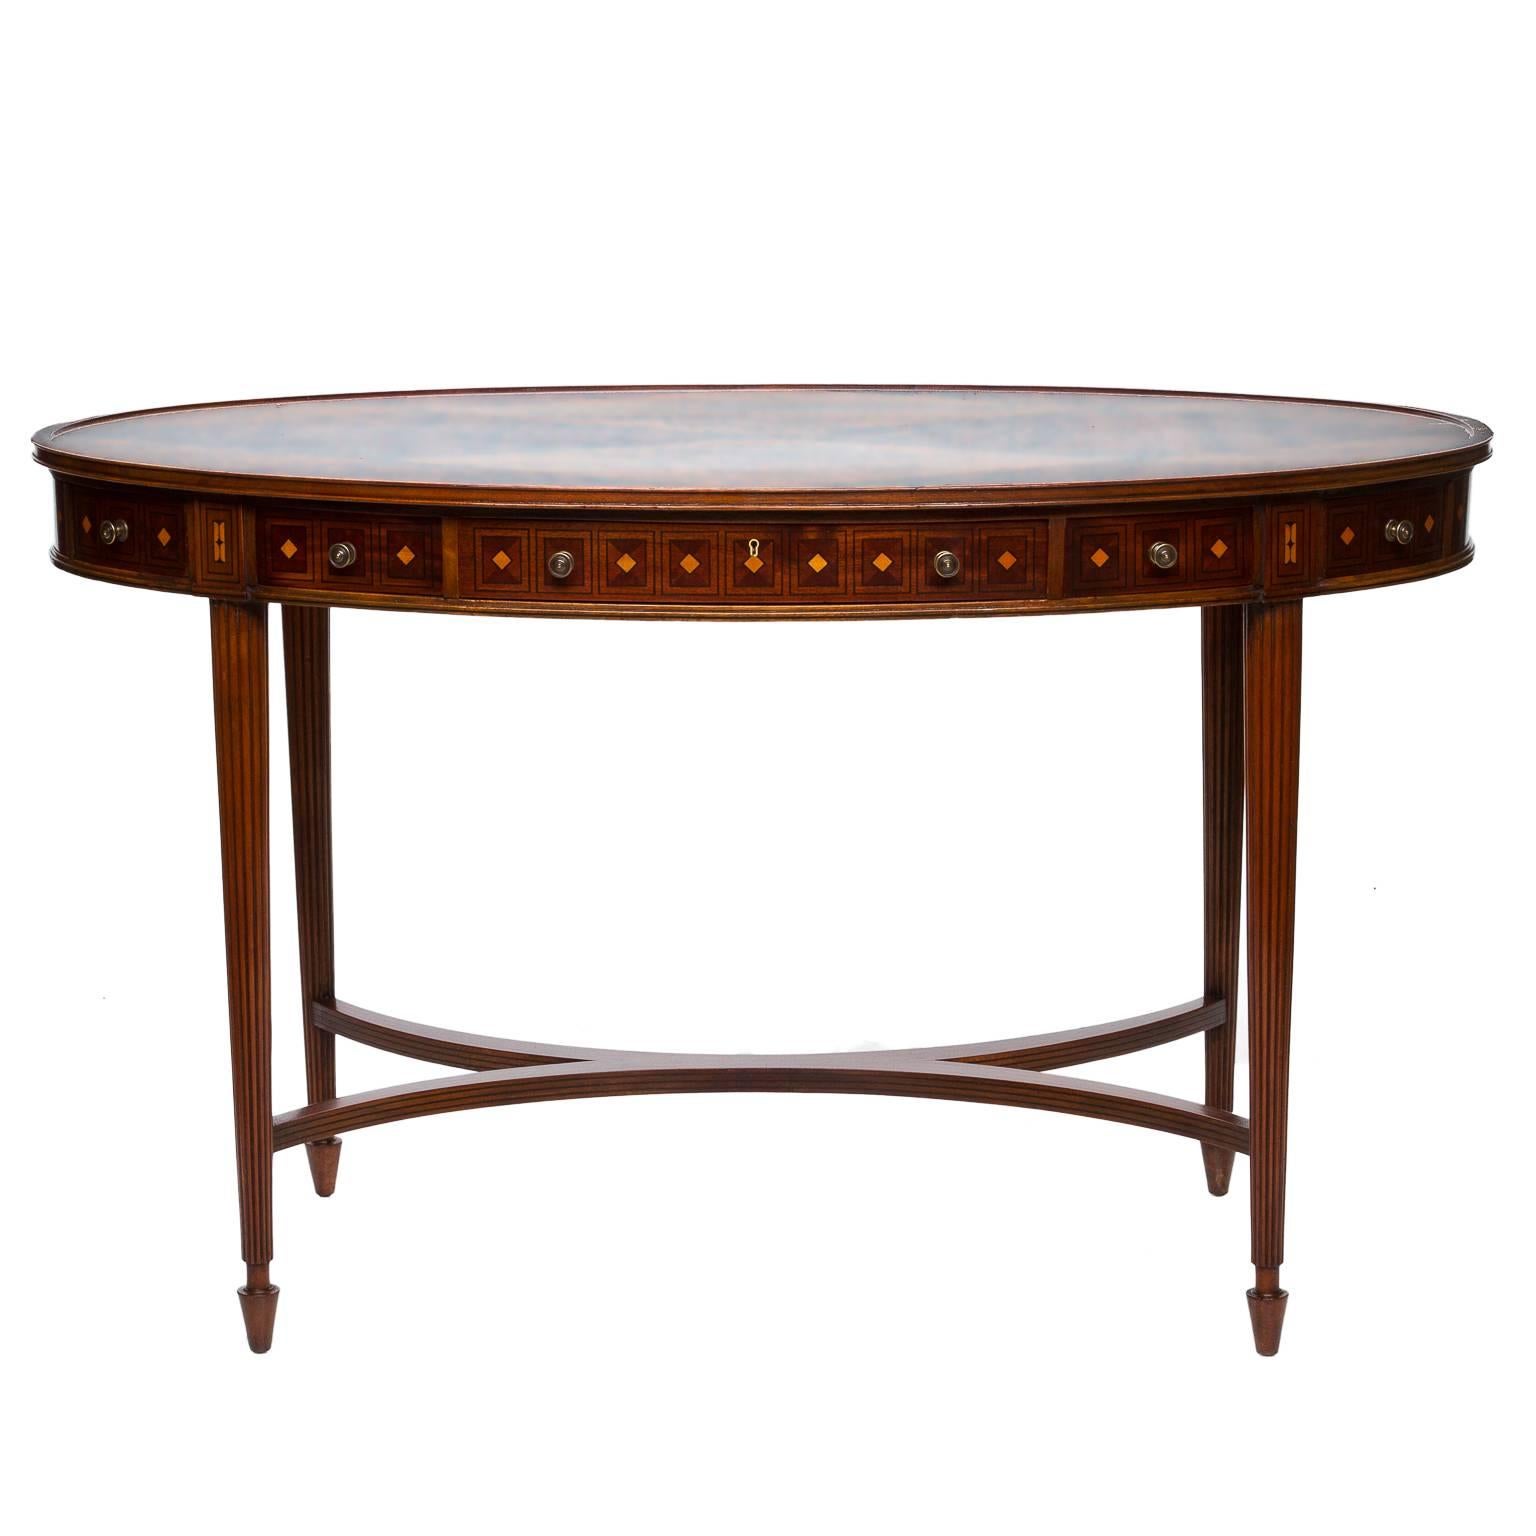 A vintage English inlaid oval writing desk. Fine inlay work was performed on this desk! Functional drawers on one side. A reeded tapered leg leading down to turned feet. An X-stretcher. Beautiful diamond shaped patterned veneered top. Mahogany cuts